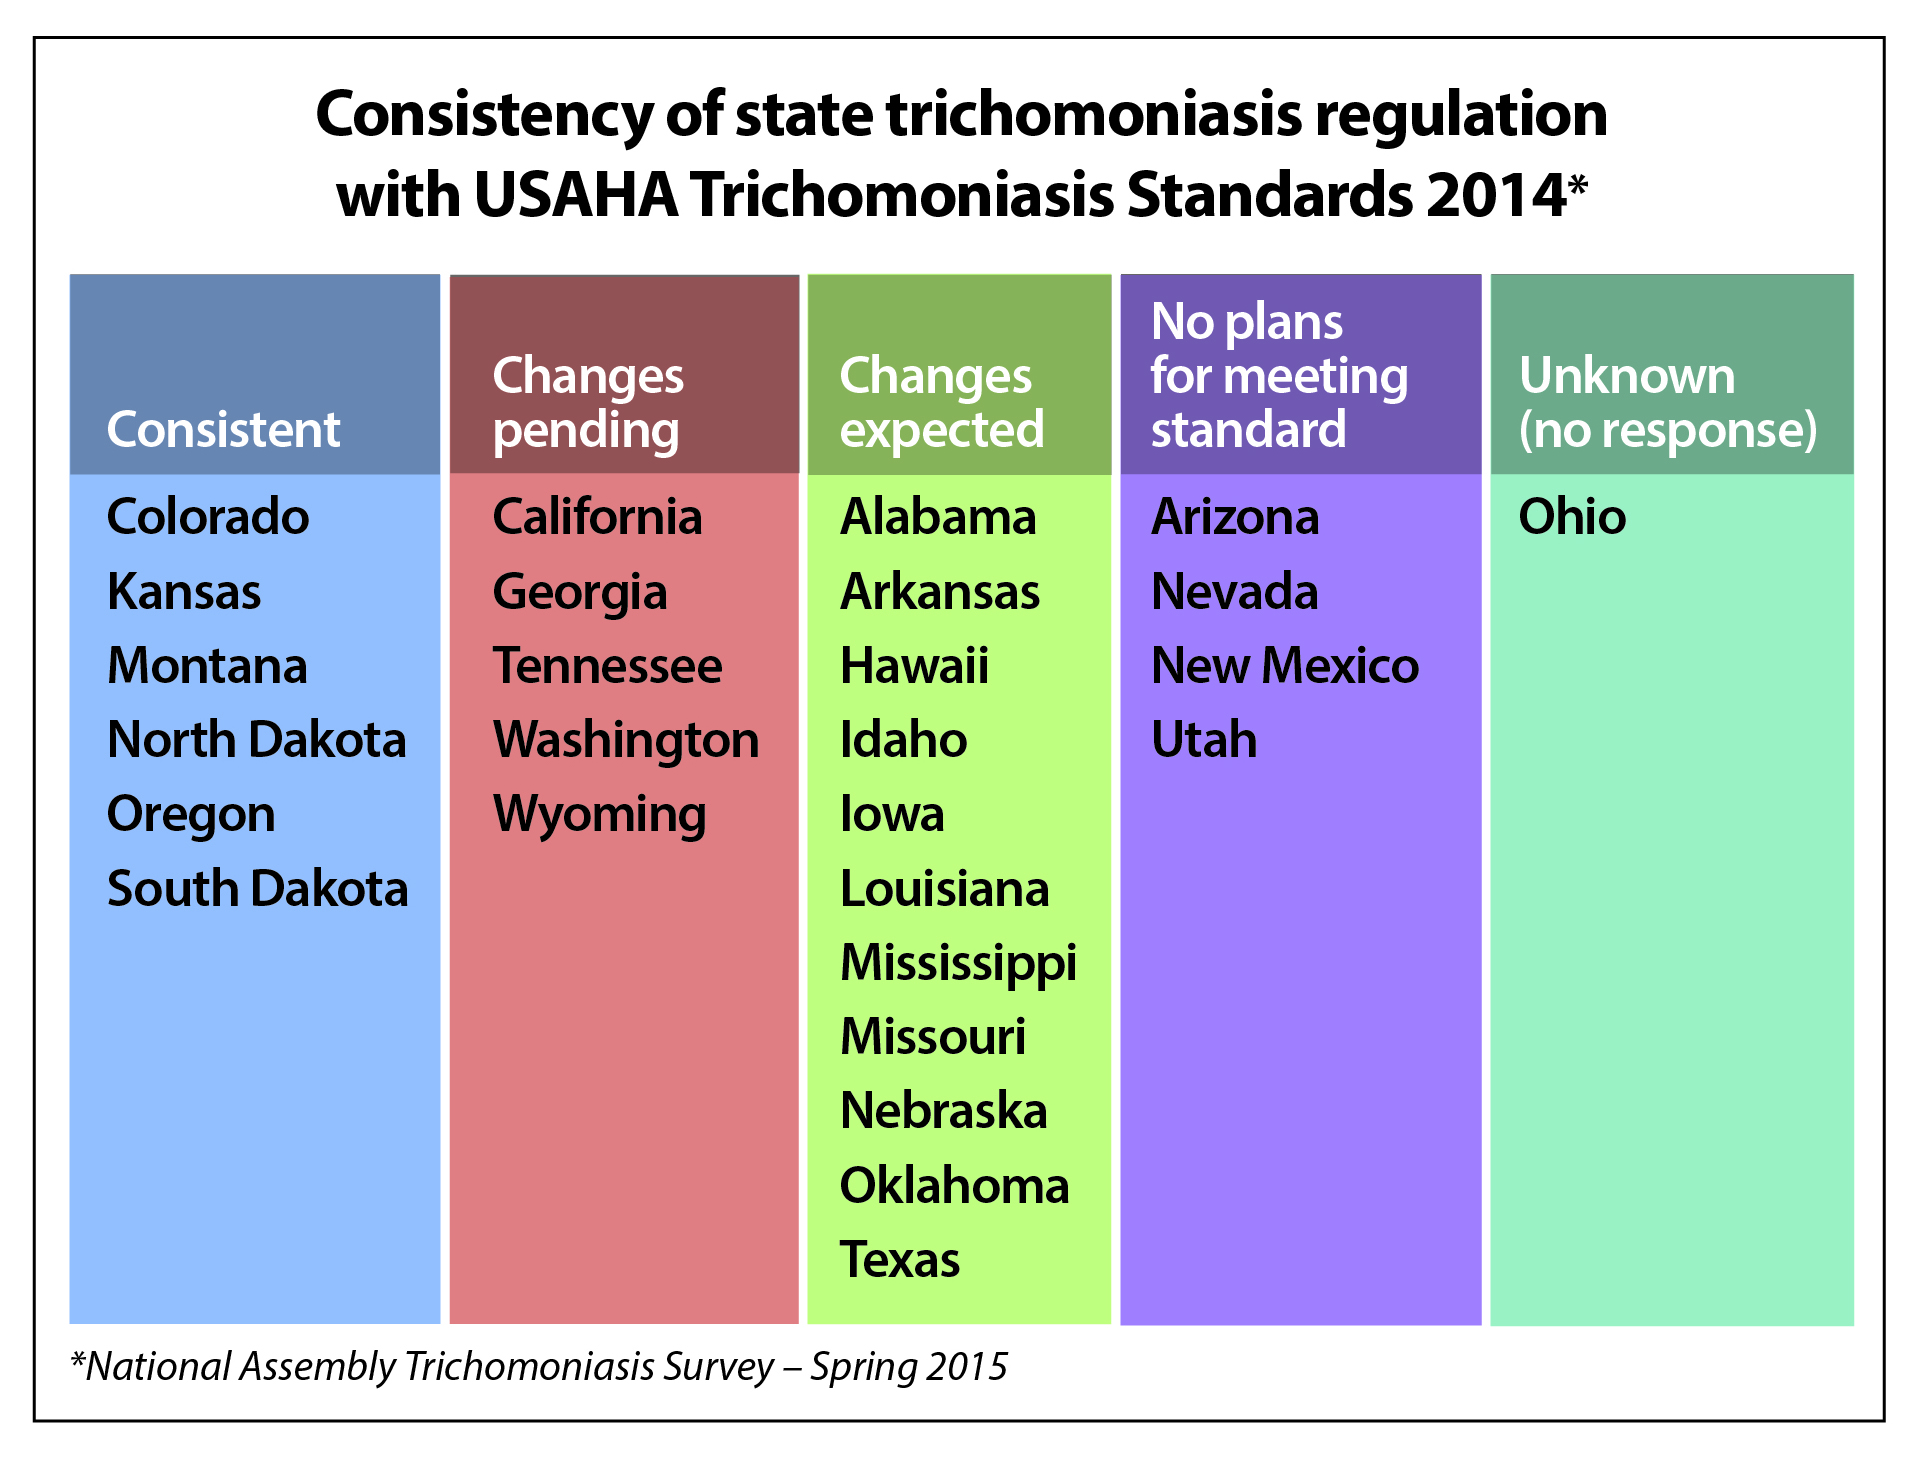 Trich intentions to harmonize regulations